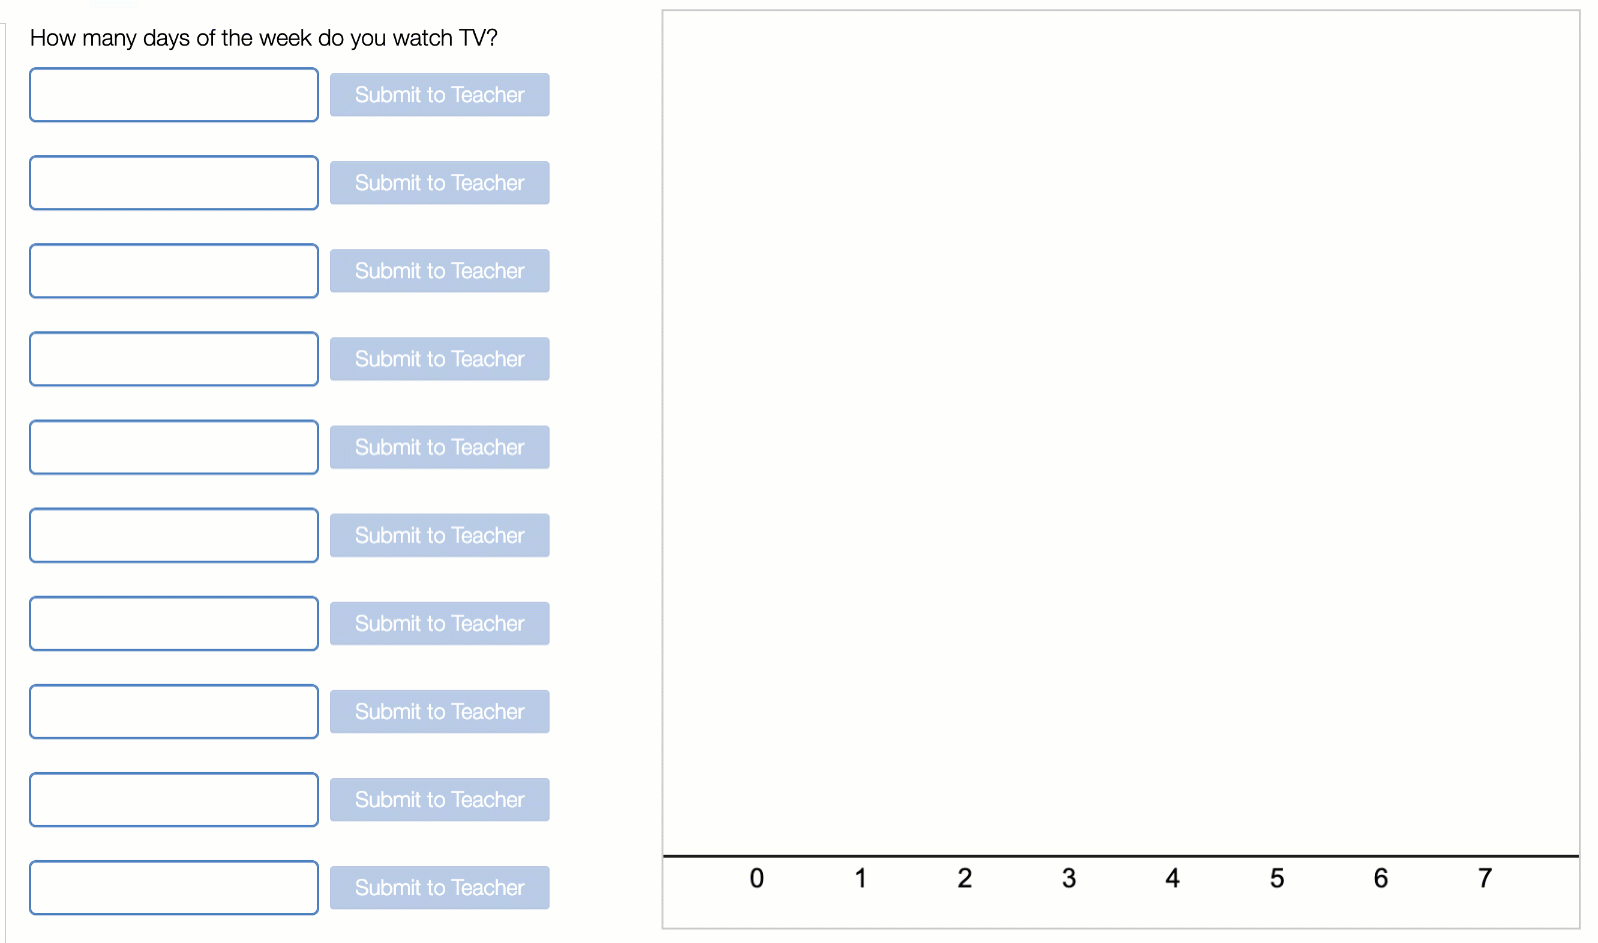 A dot plot showing the collected data